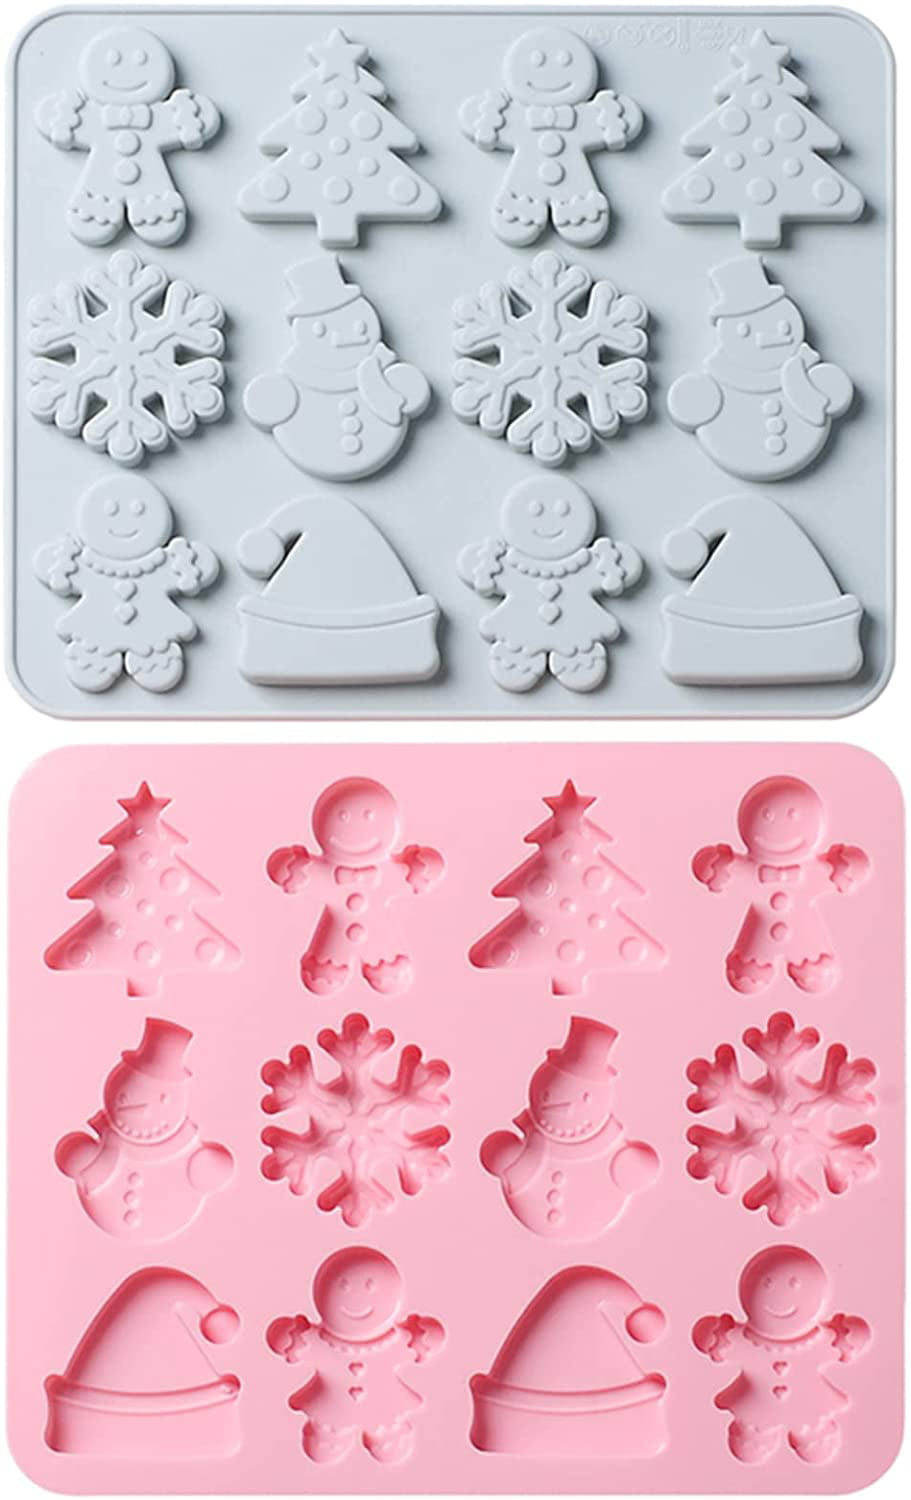 Pink 2Pcs Christmas Chocolate Moulds Silicone Fondant Mould Xmas Tree Snowman Snowflake Gingerbread Star Man Molds Ice Cube Tray Candy Cookies Dessert Baking Mold for Cake Decorating Sugarcraft DIY